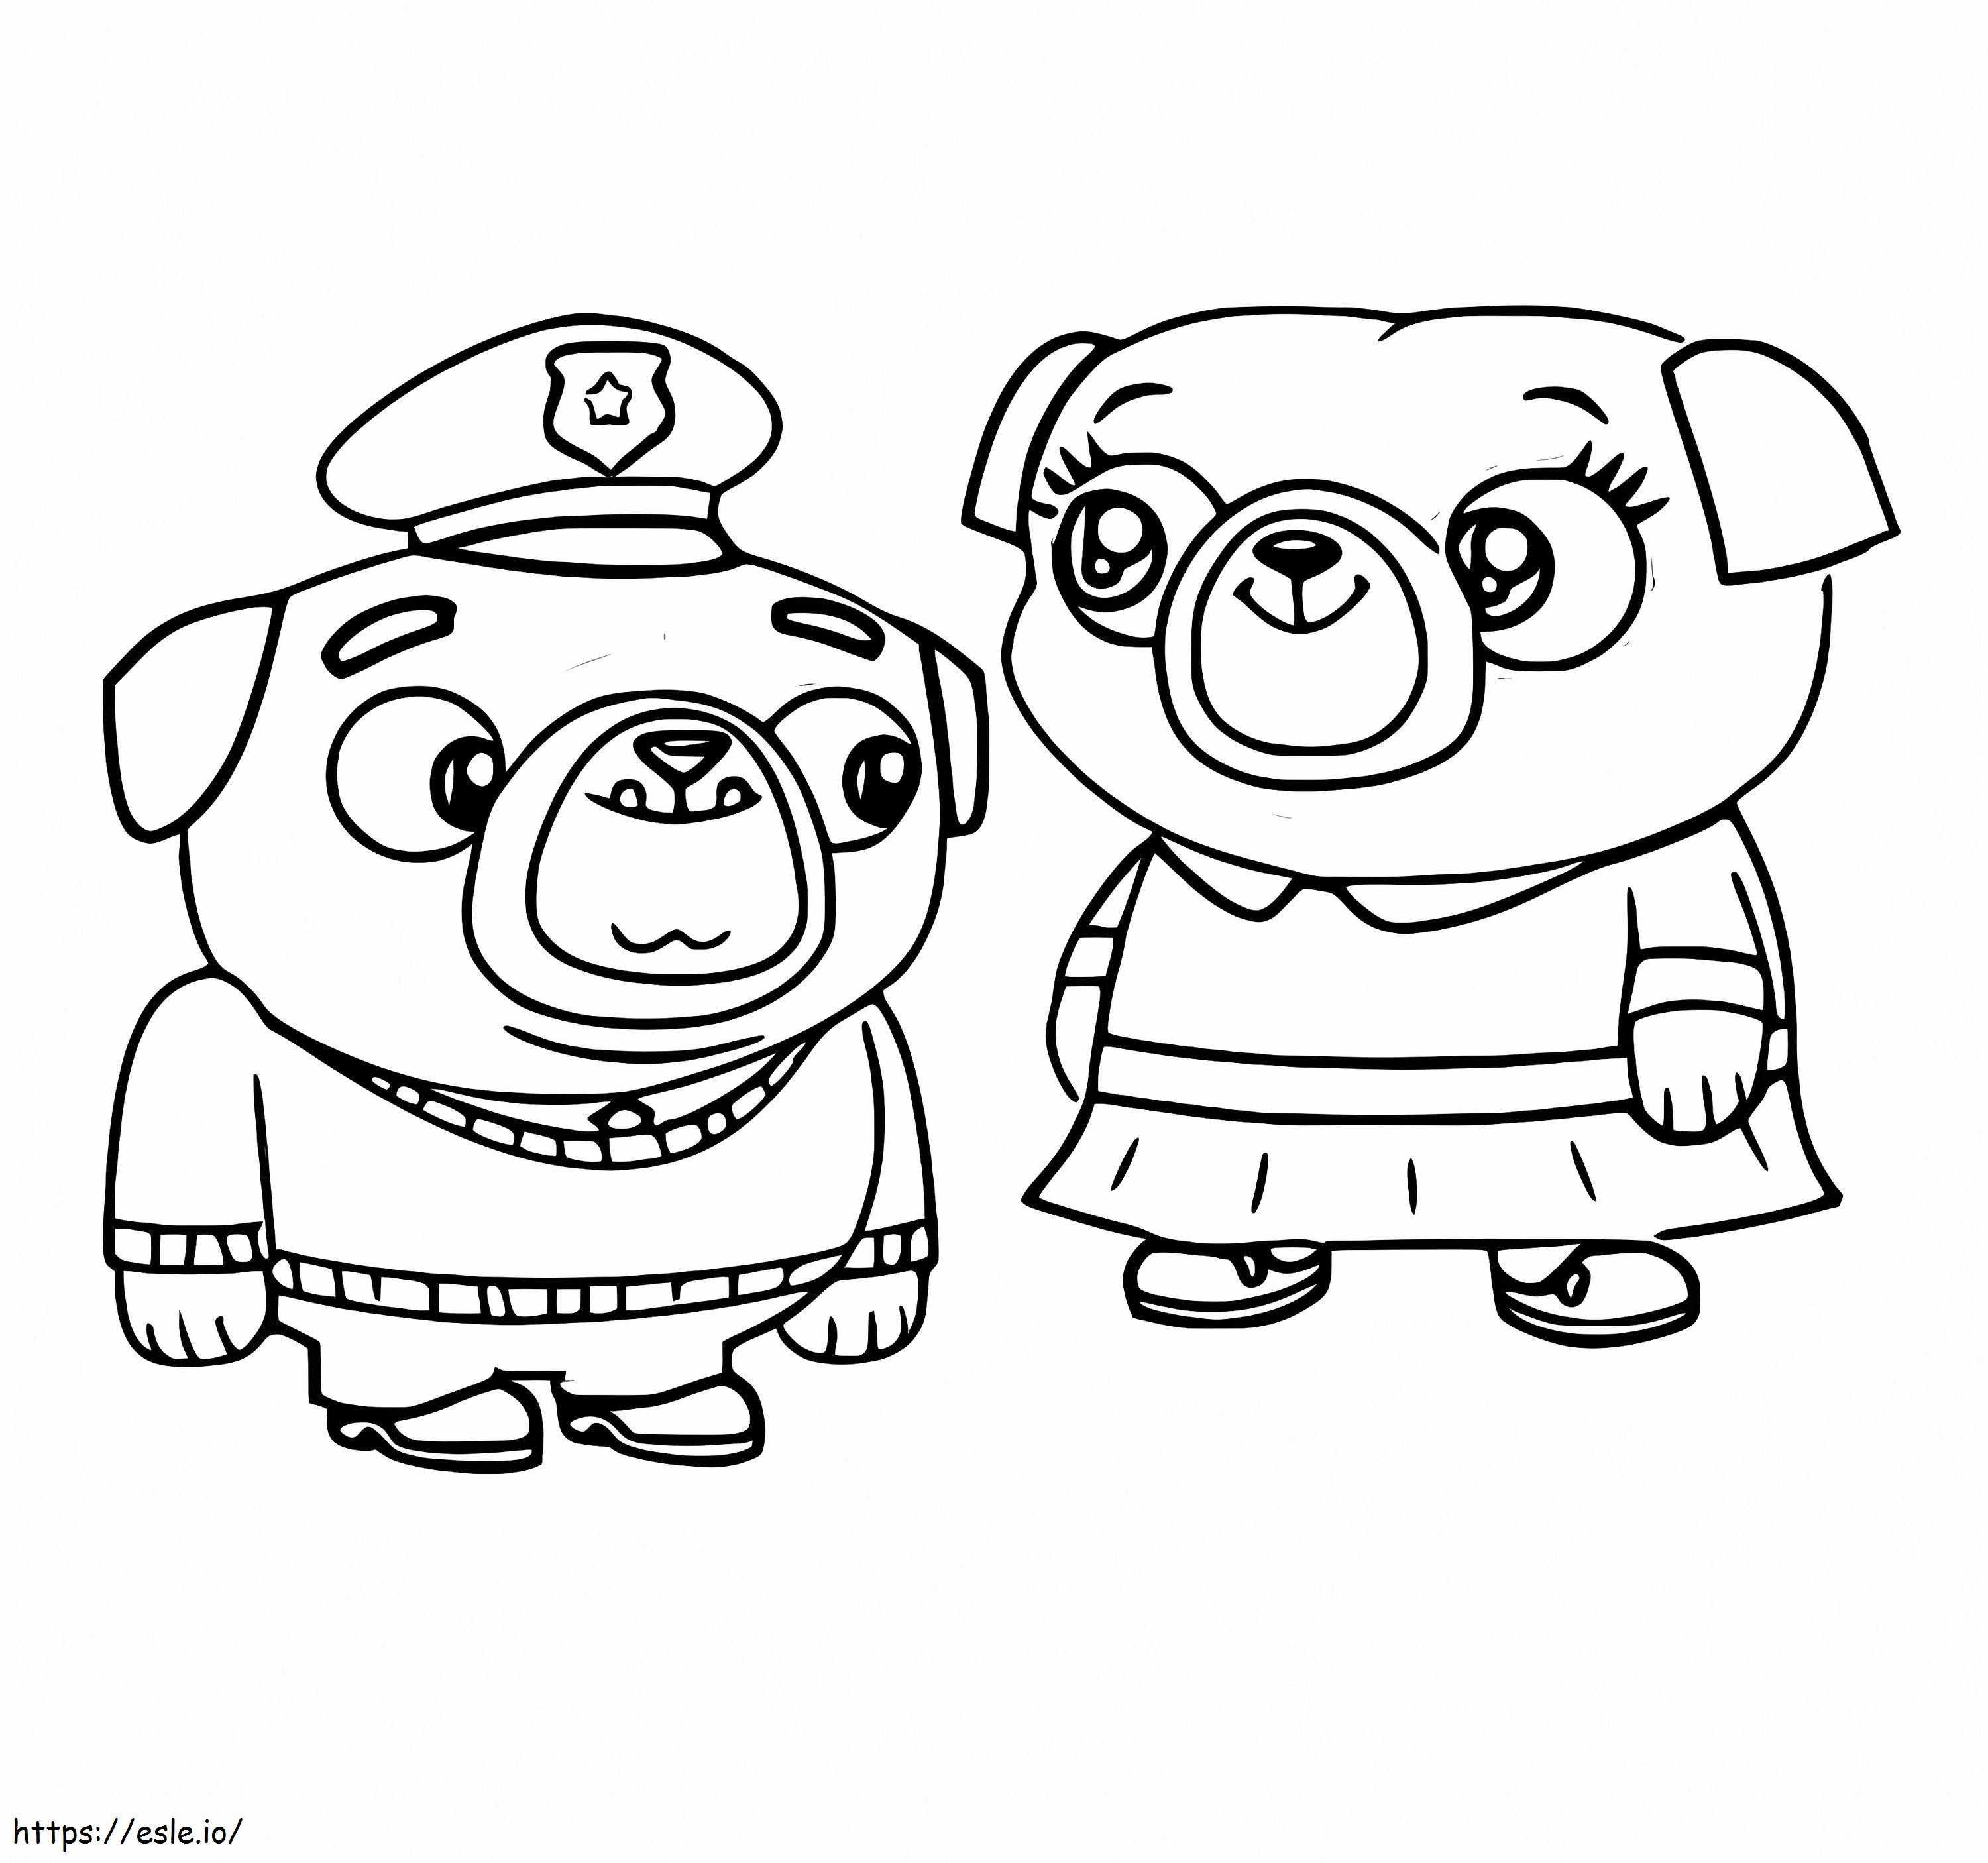 Chip And Potato 4 coloring page